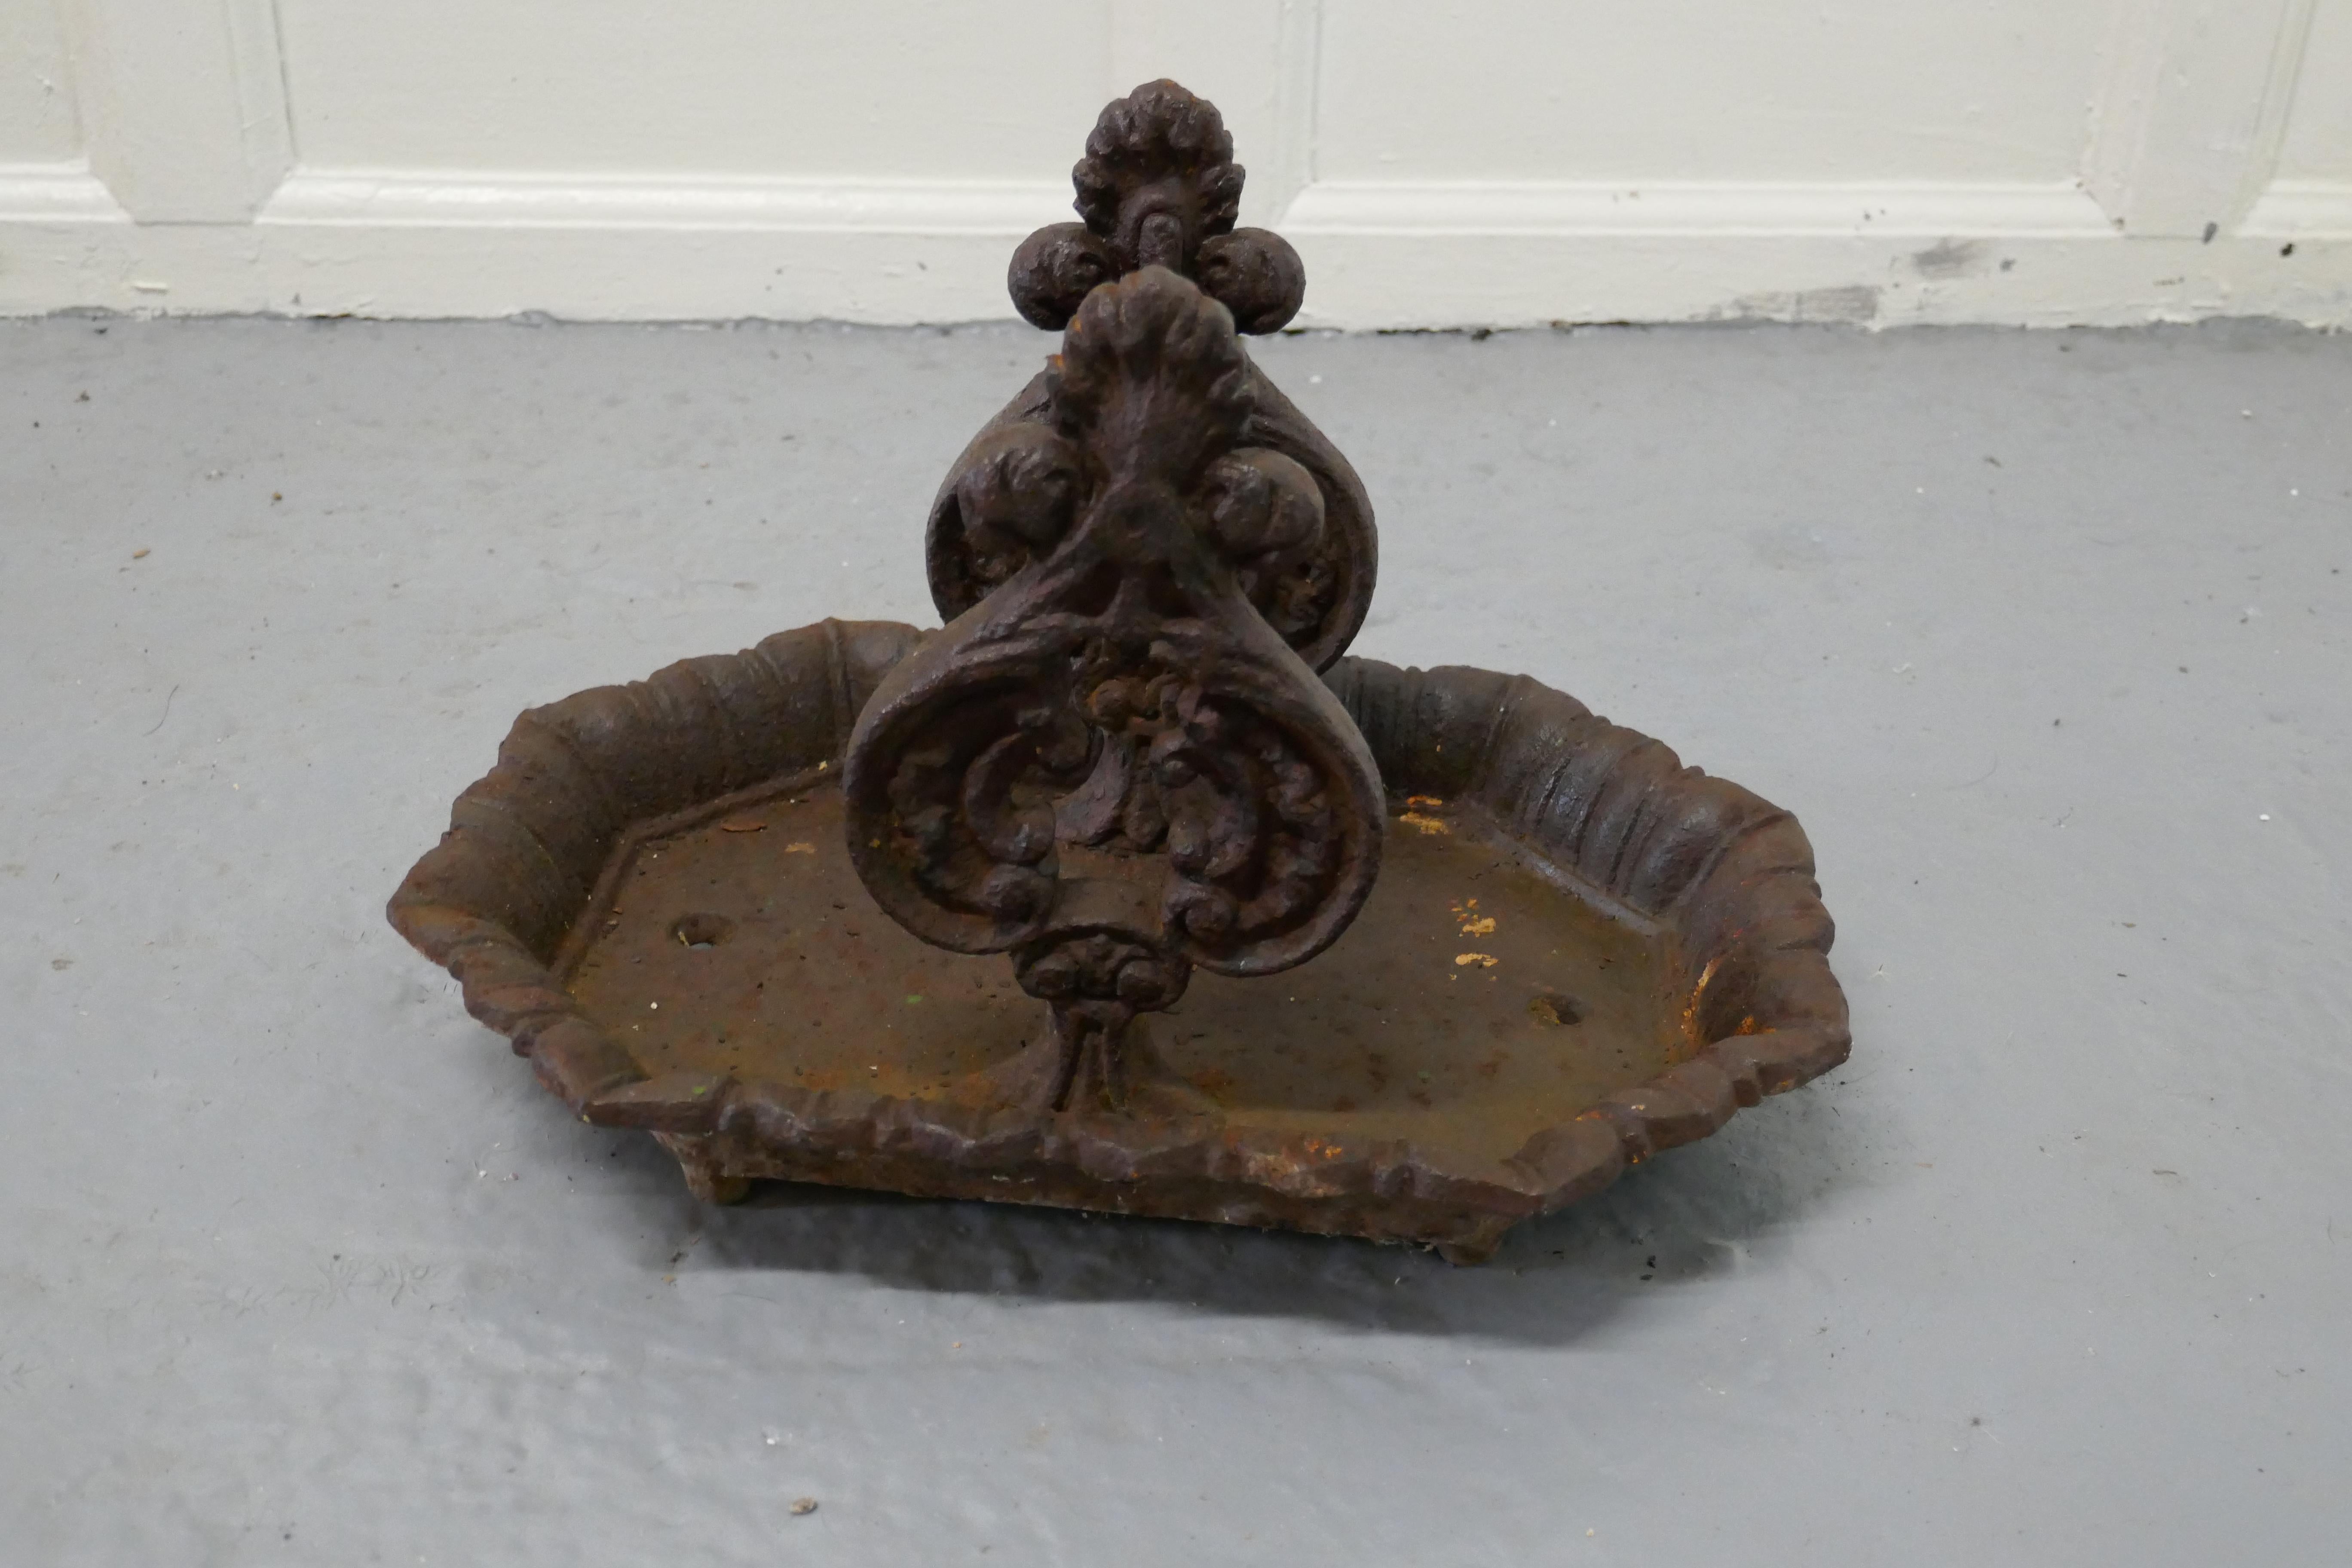 Victorian cast iron boot scraper by T Holcroft & Sons Ltd Wolverhampton

This is a very old piece, it is very heavy, the scraper is set on a large tray which has a decorative edge has
It has never been painted it is well weatherd and used but